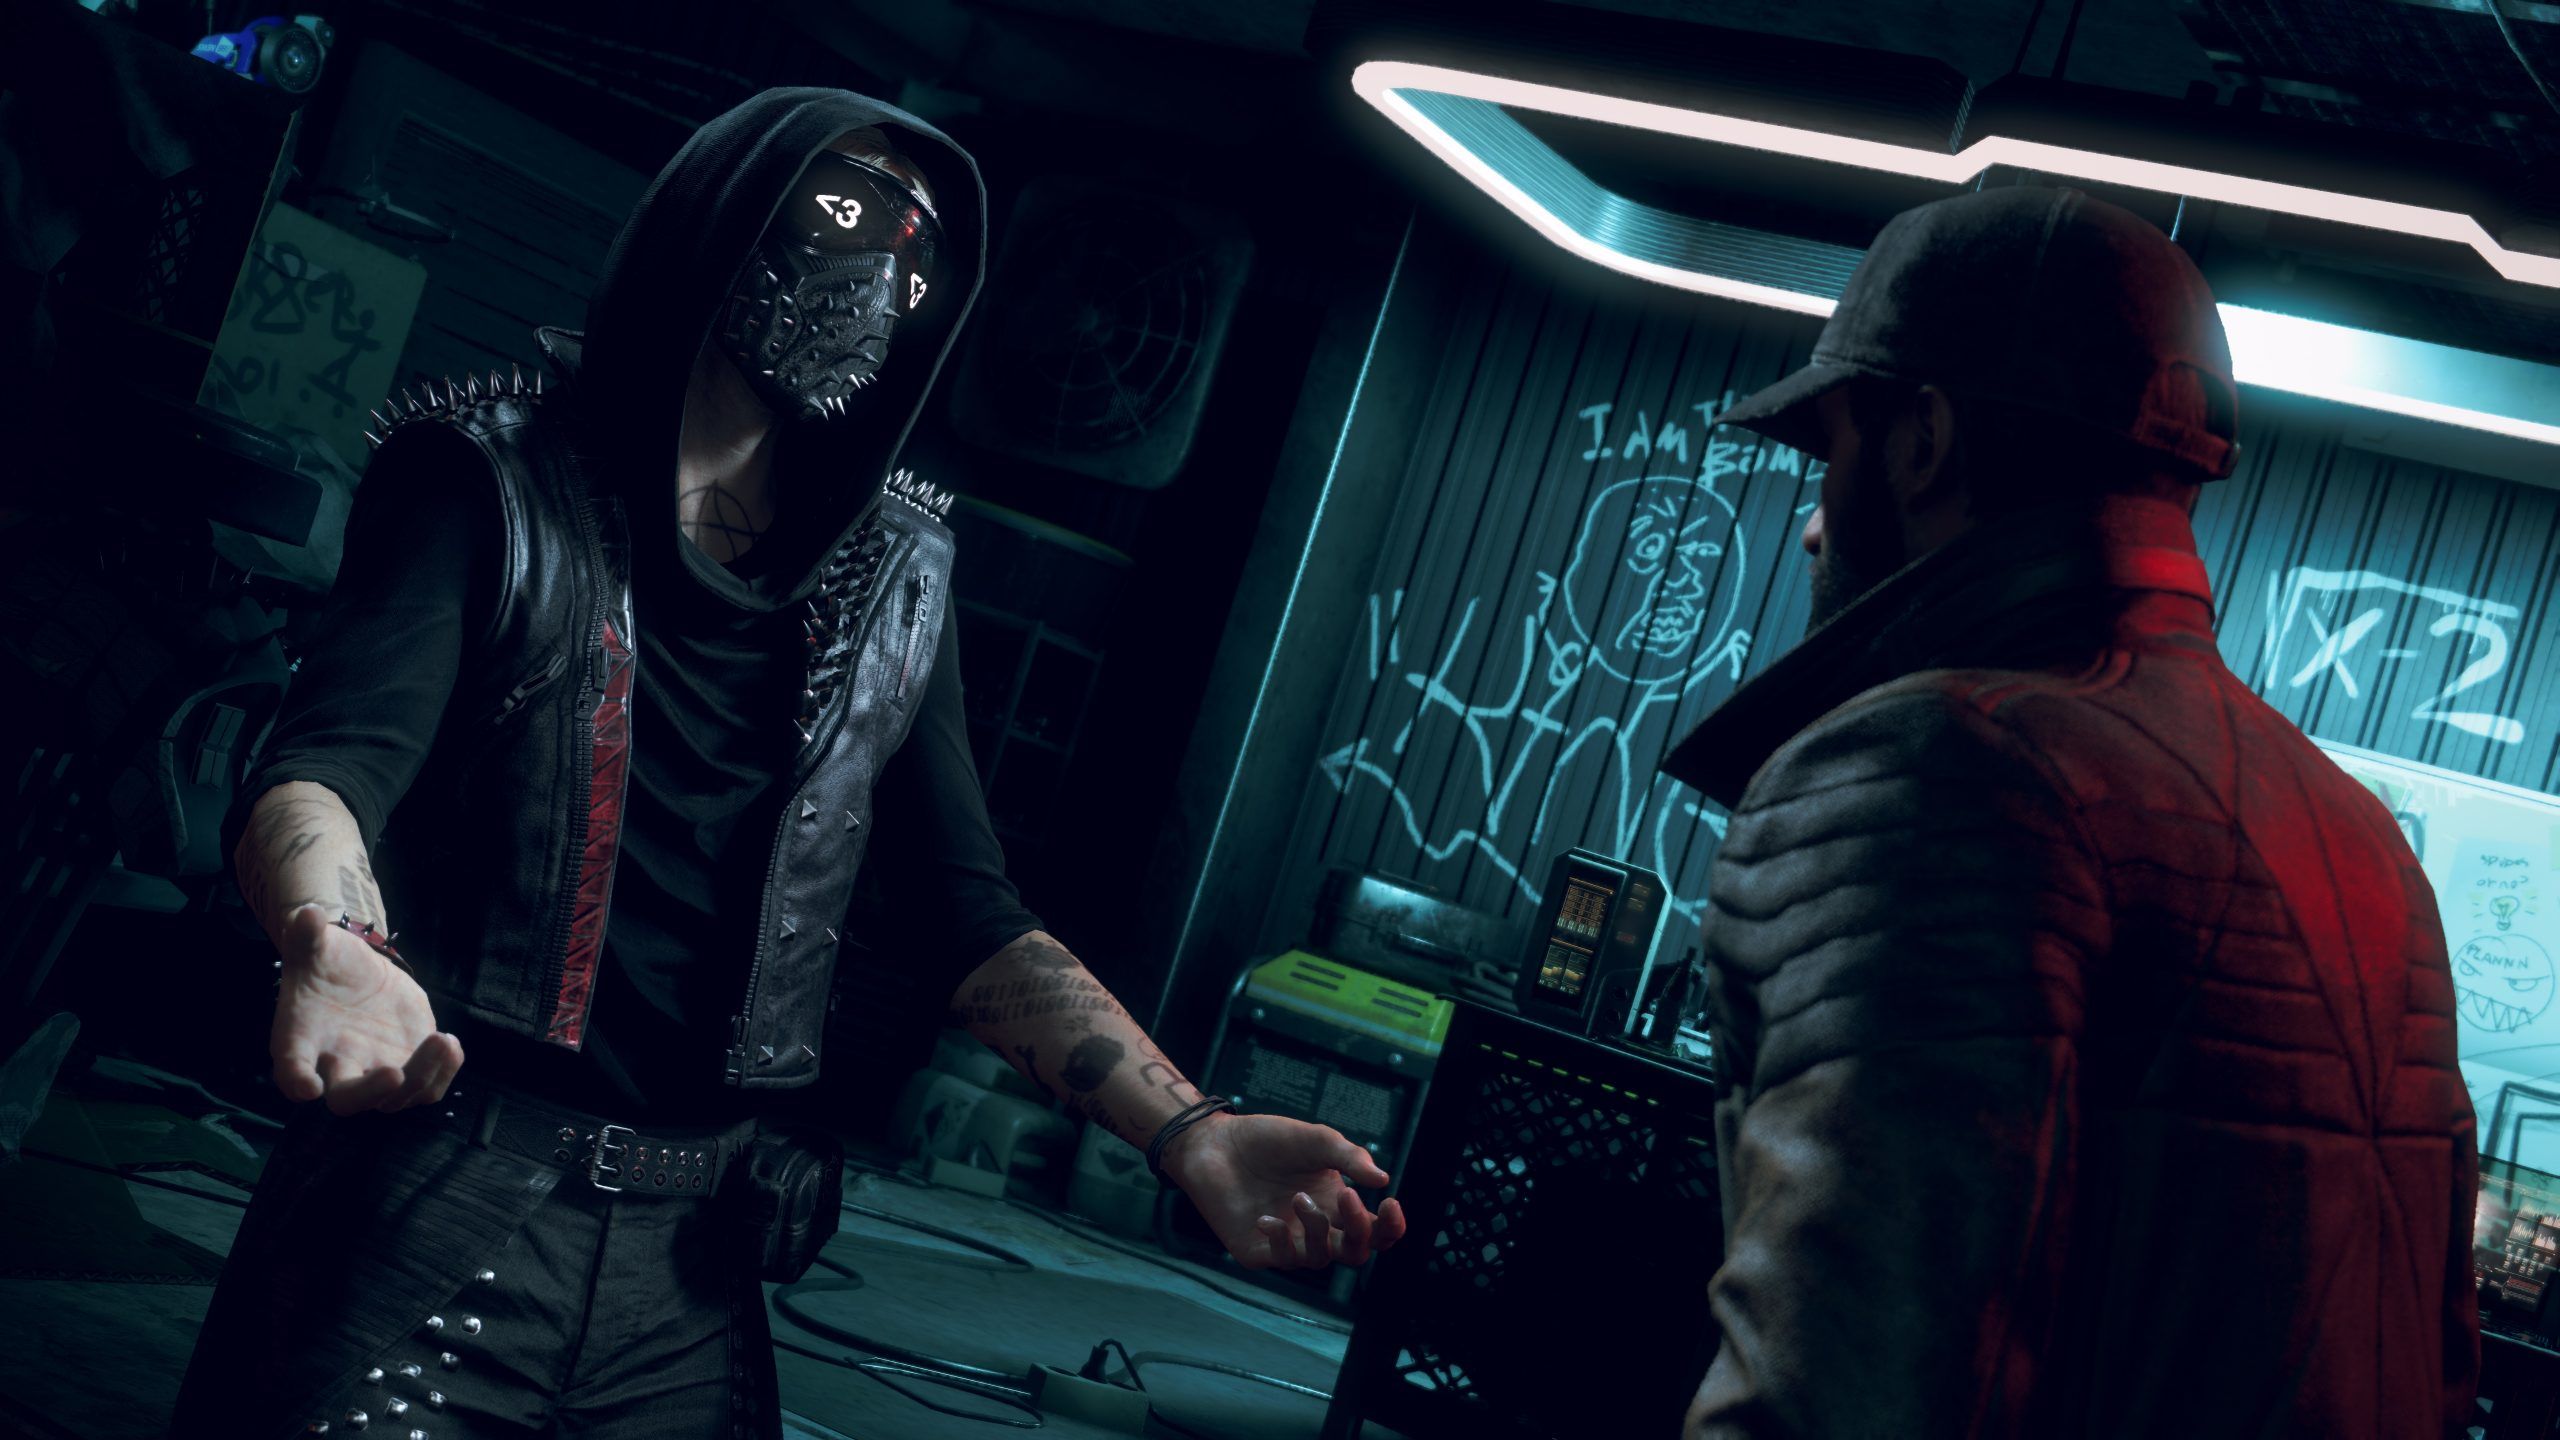 Watch Dogs Legion: Bloodline DLC Date, Price, and More